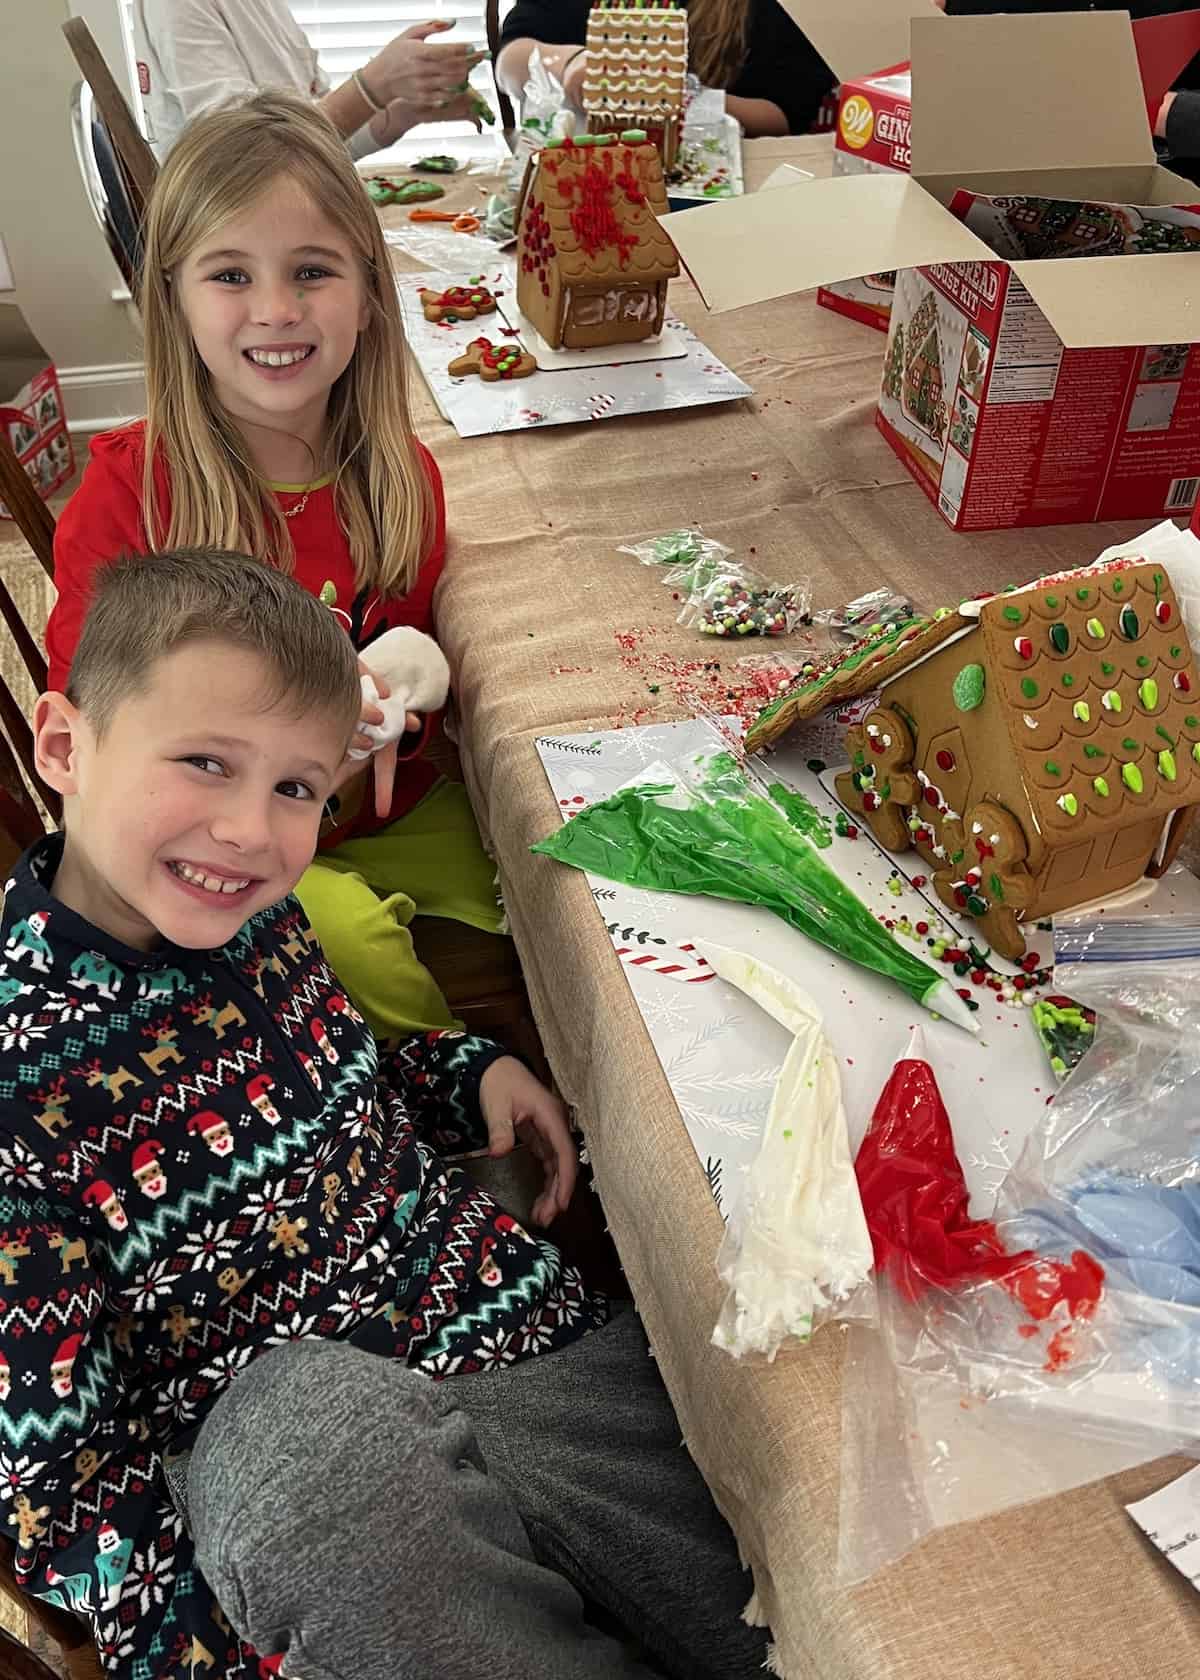 With over 40 things to do with kids during Christmas break, you are sure to find some exciting activities to keep your kiddos busy!